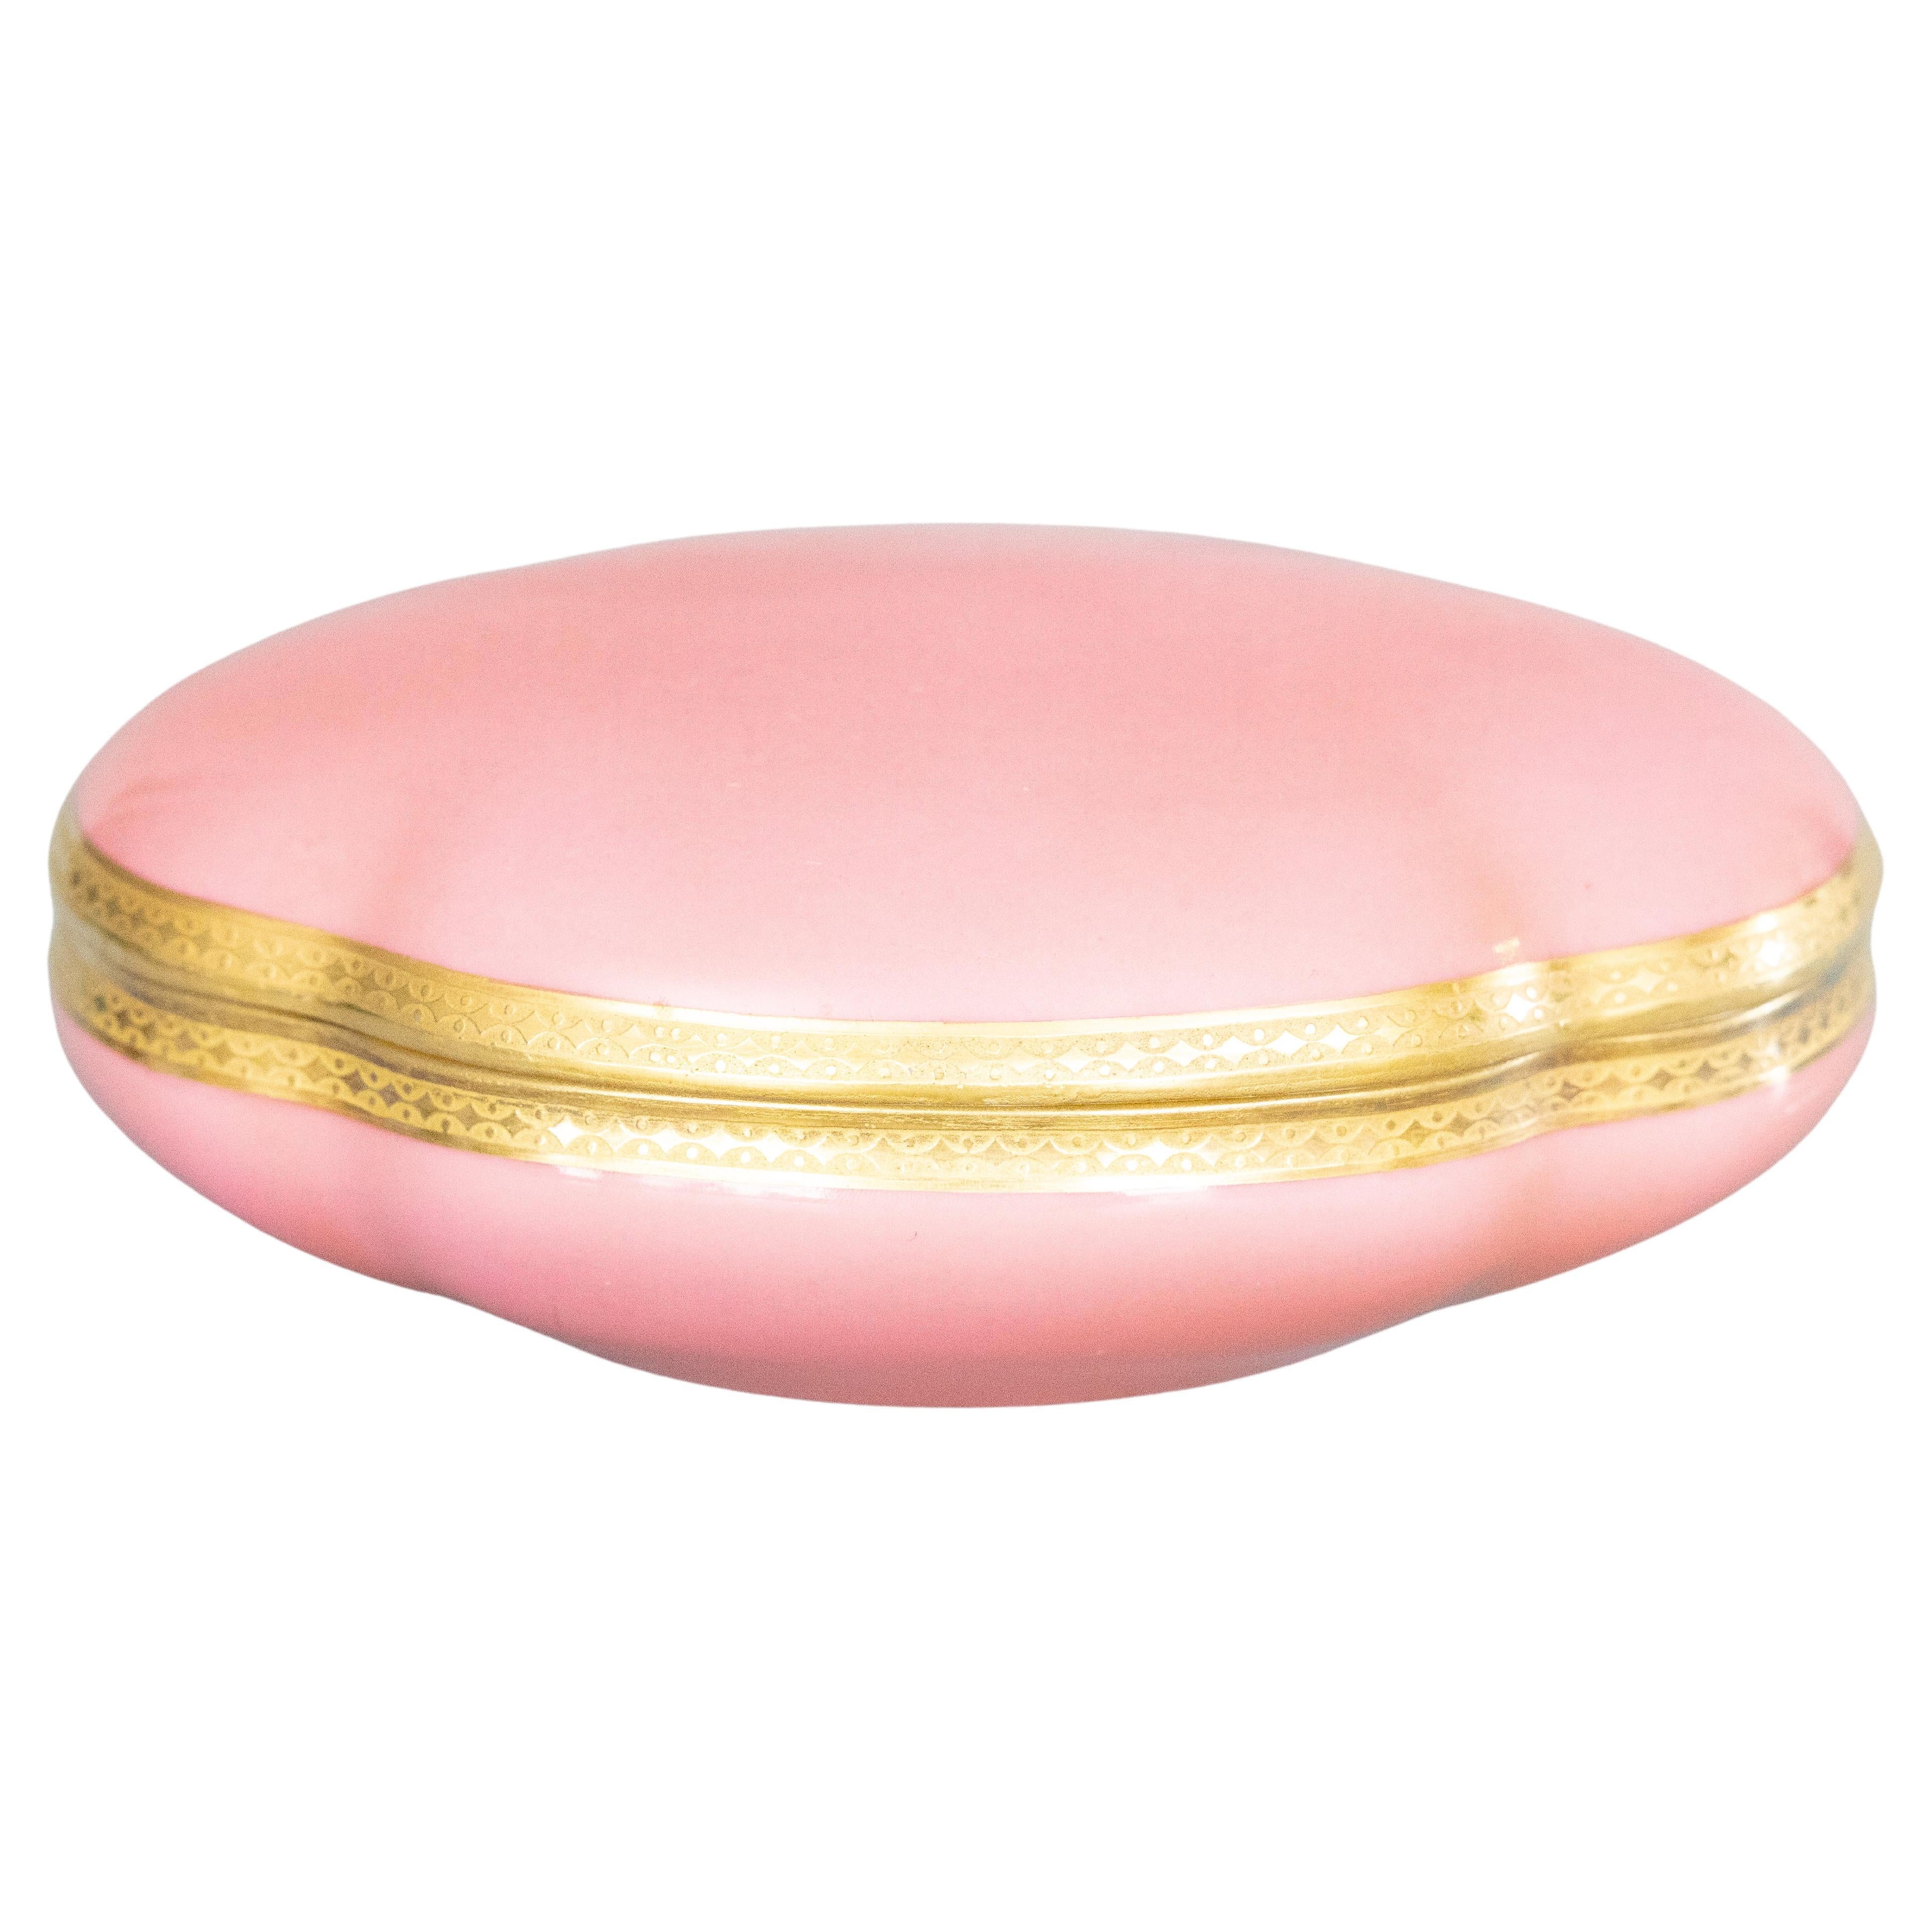 Early 20th Century French Limoges Pink Gilt Porcelain Jewelry Box For Sale